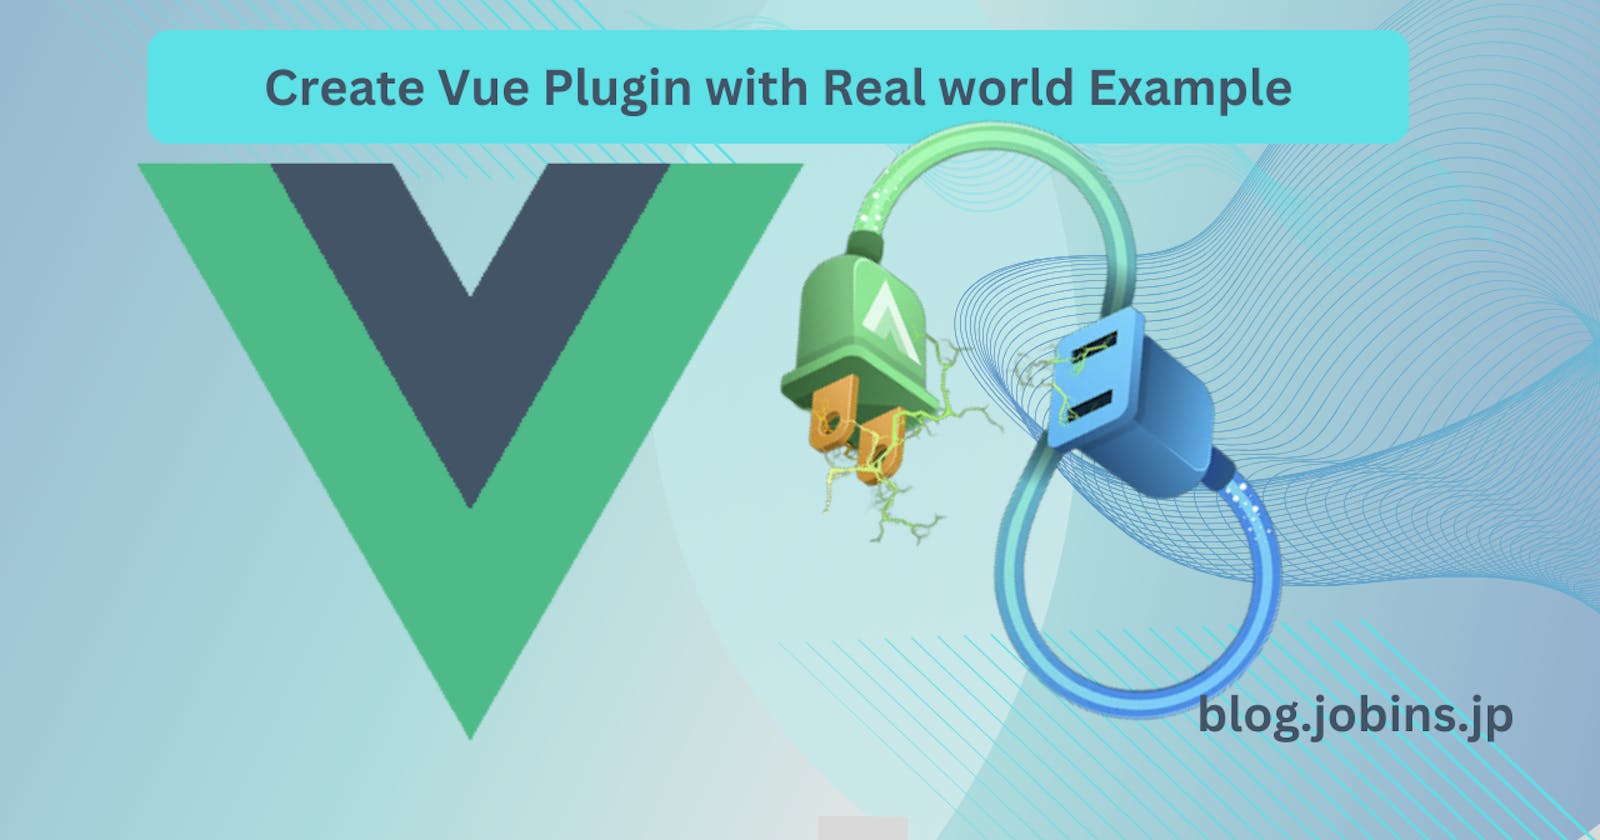 Create Vue plugin in with real world example.